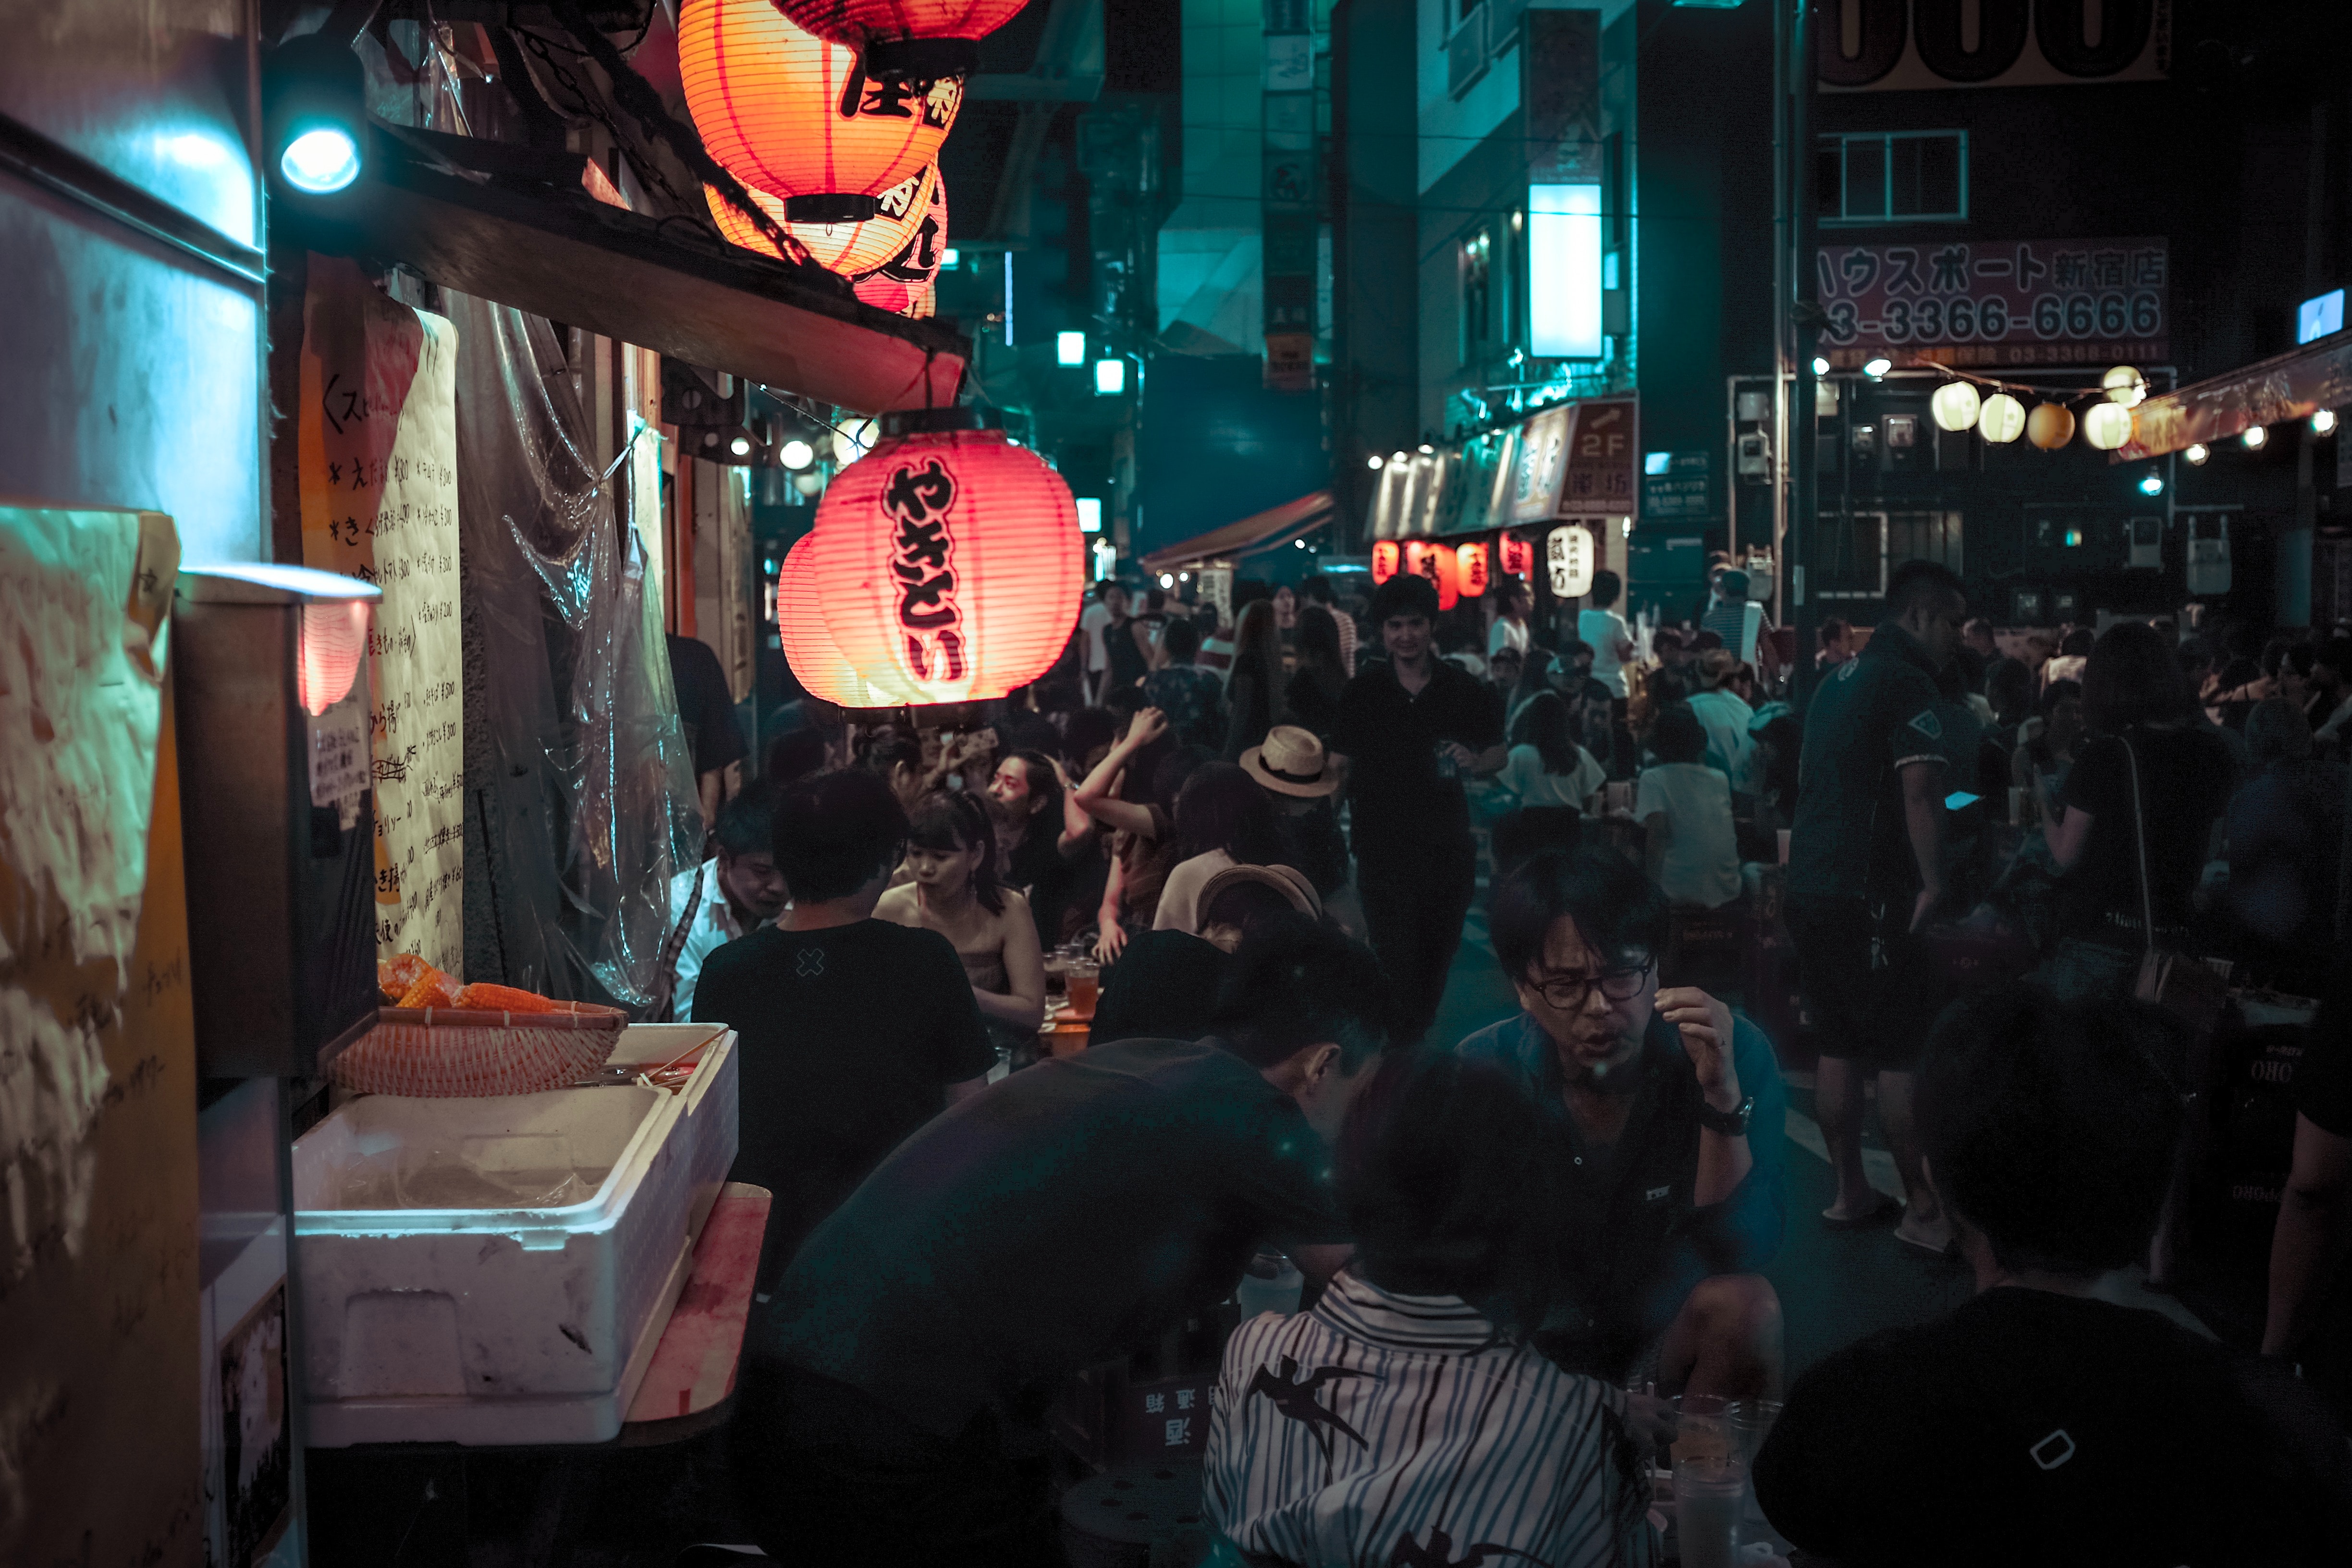 Entertainment and Nightlife in Japan